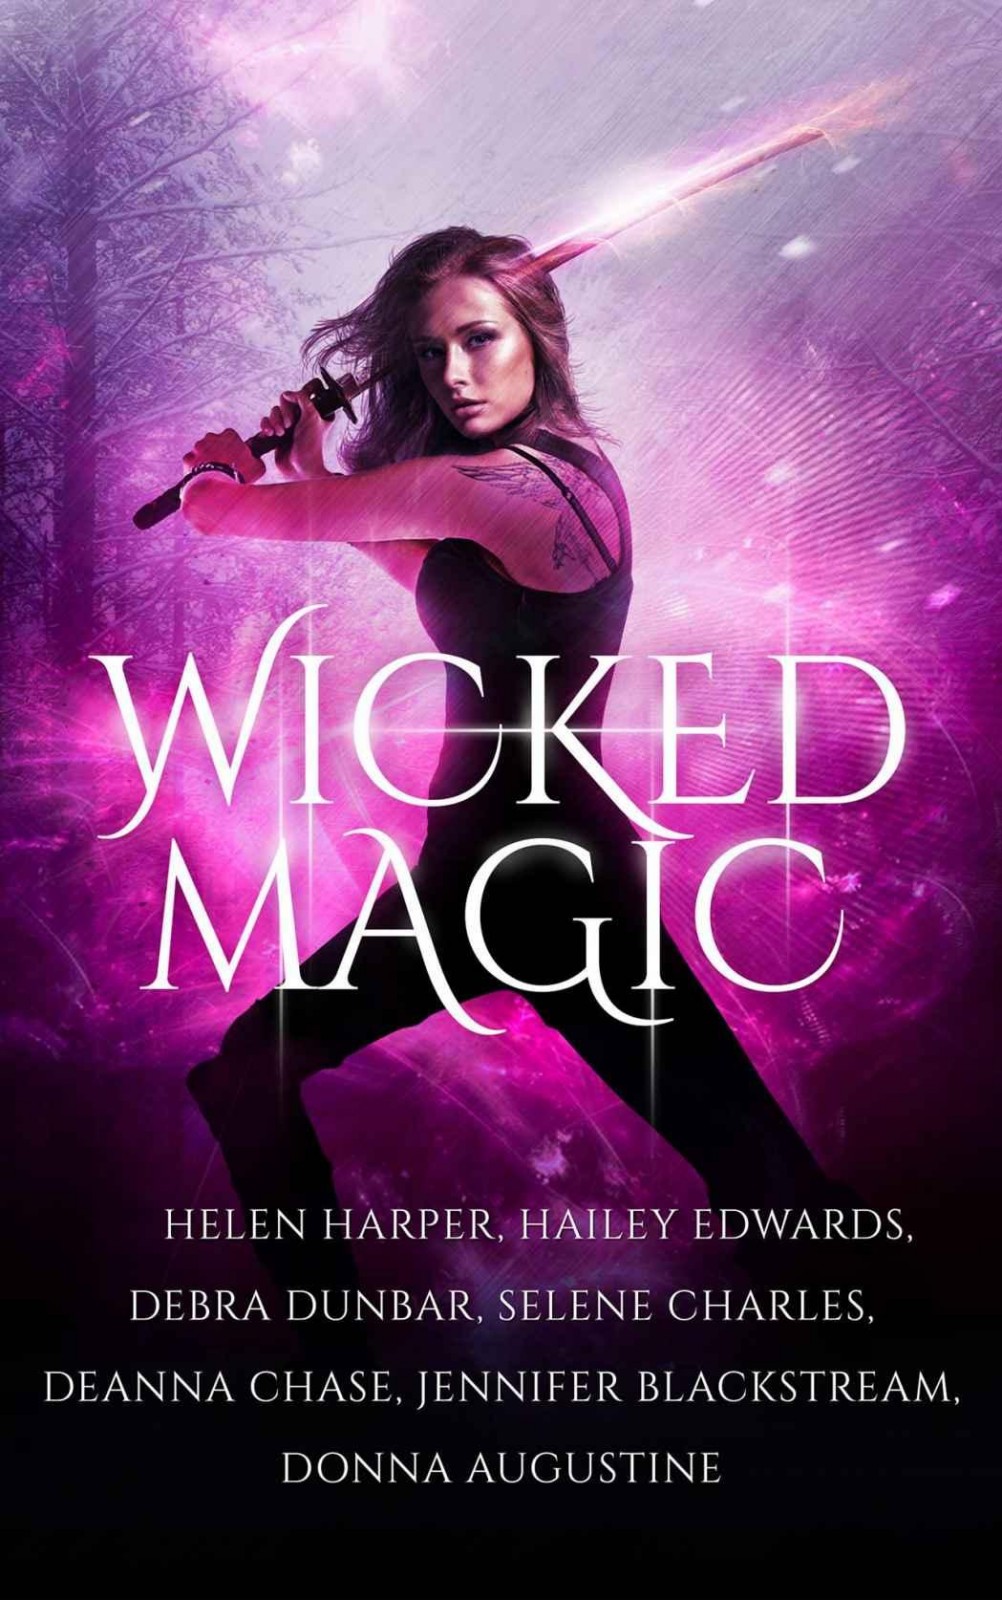 Wicked Magic (7 Wicked Tales Featuring Witches, Demons, Vampires, Fae, and More)